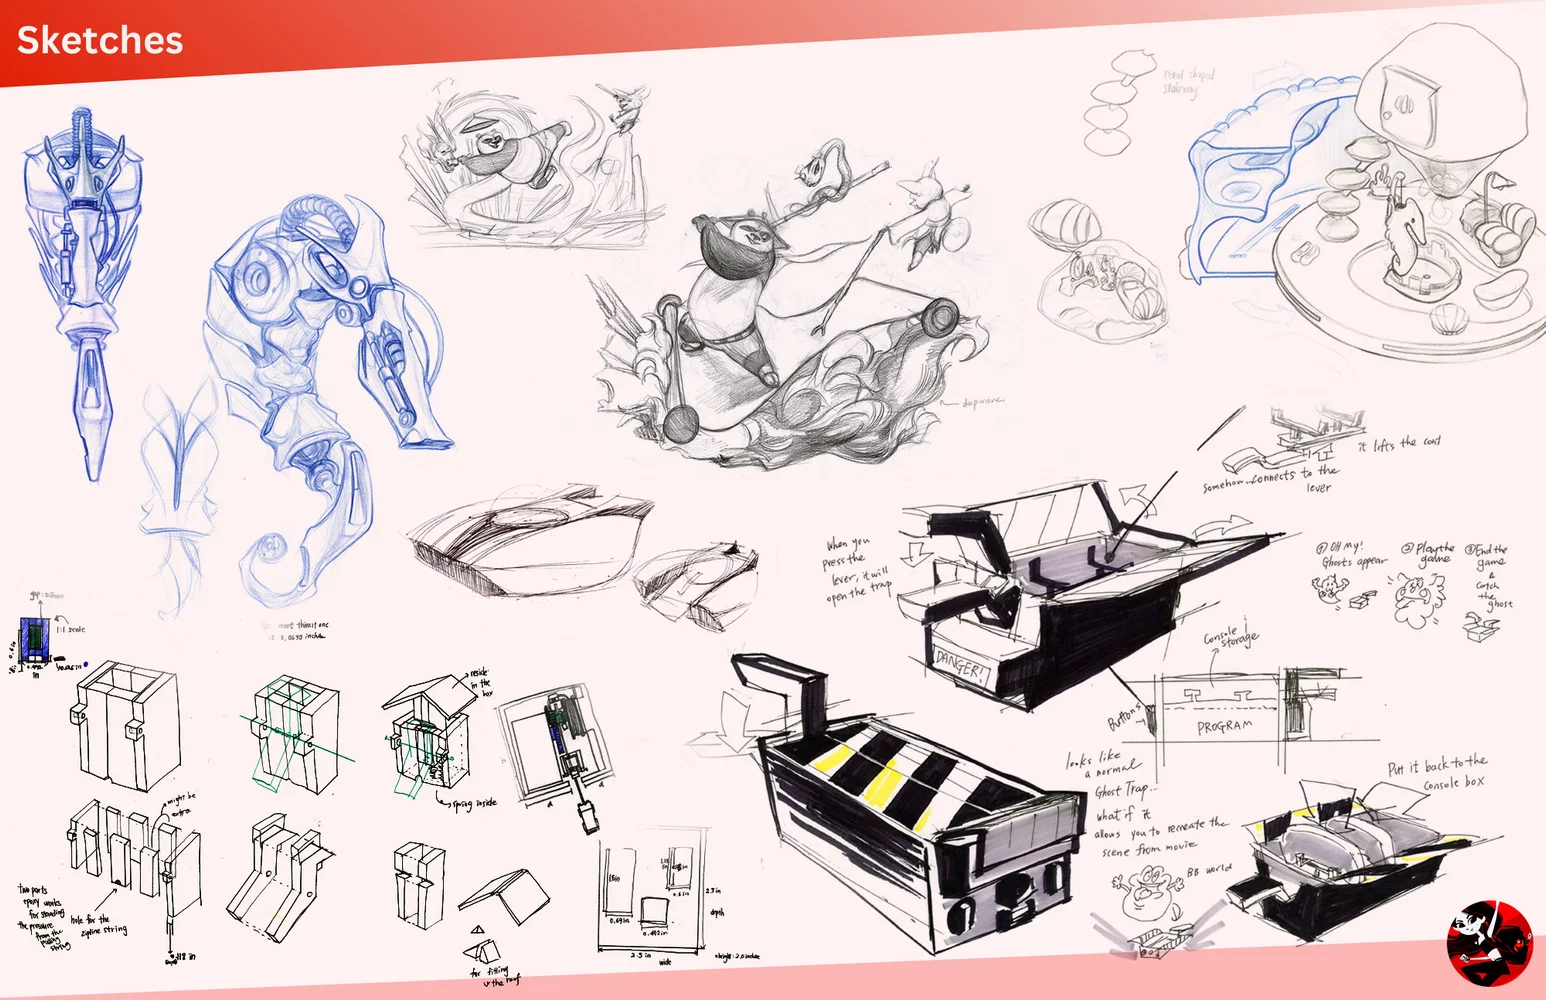 Some initial concept sketches, mechanism drawing, and design developmental sketches.